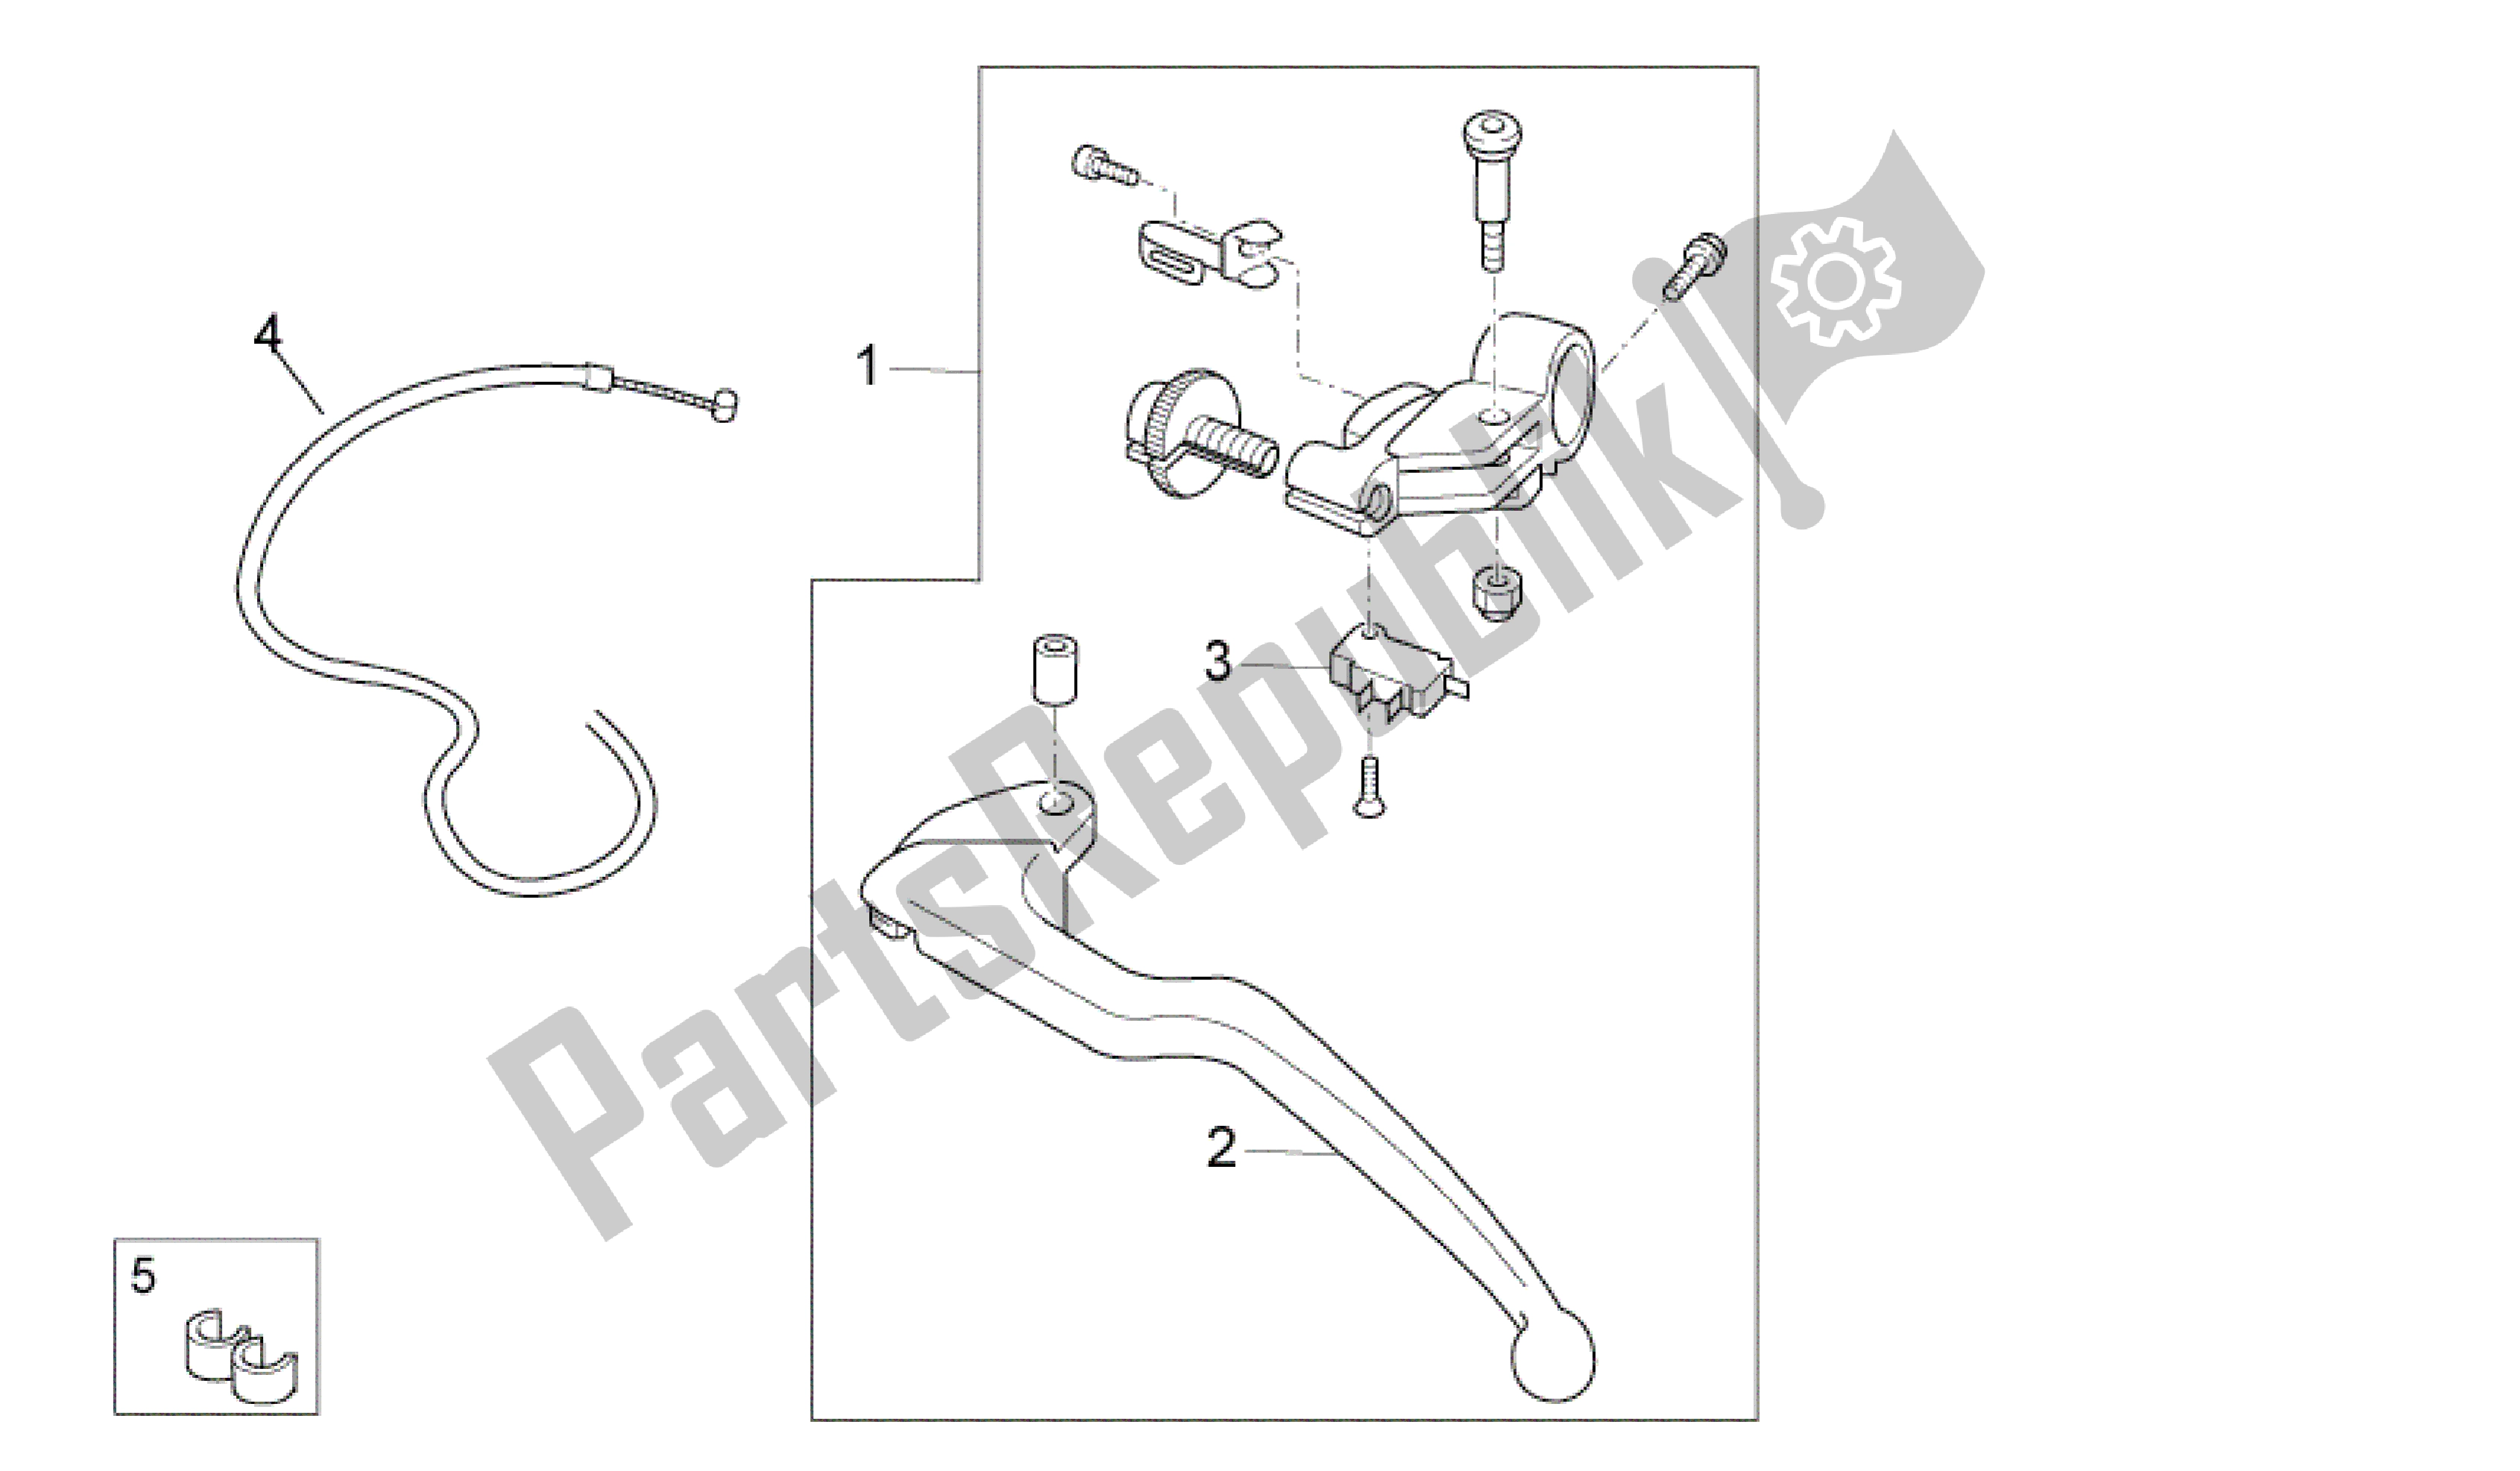 All parts for the Clutch Lever of the Aprilia RSV4 Aprc Factory ABS 3986 1000 2013